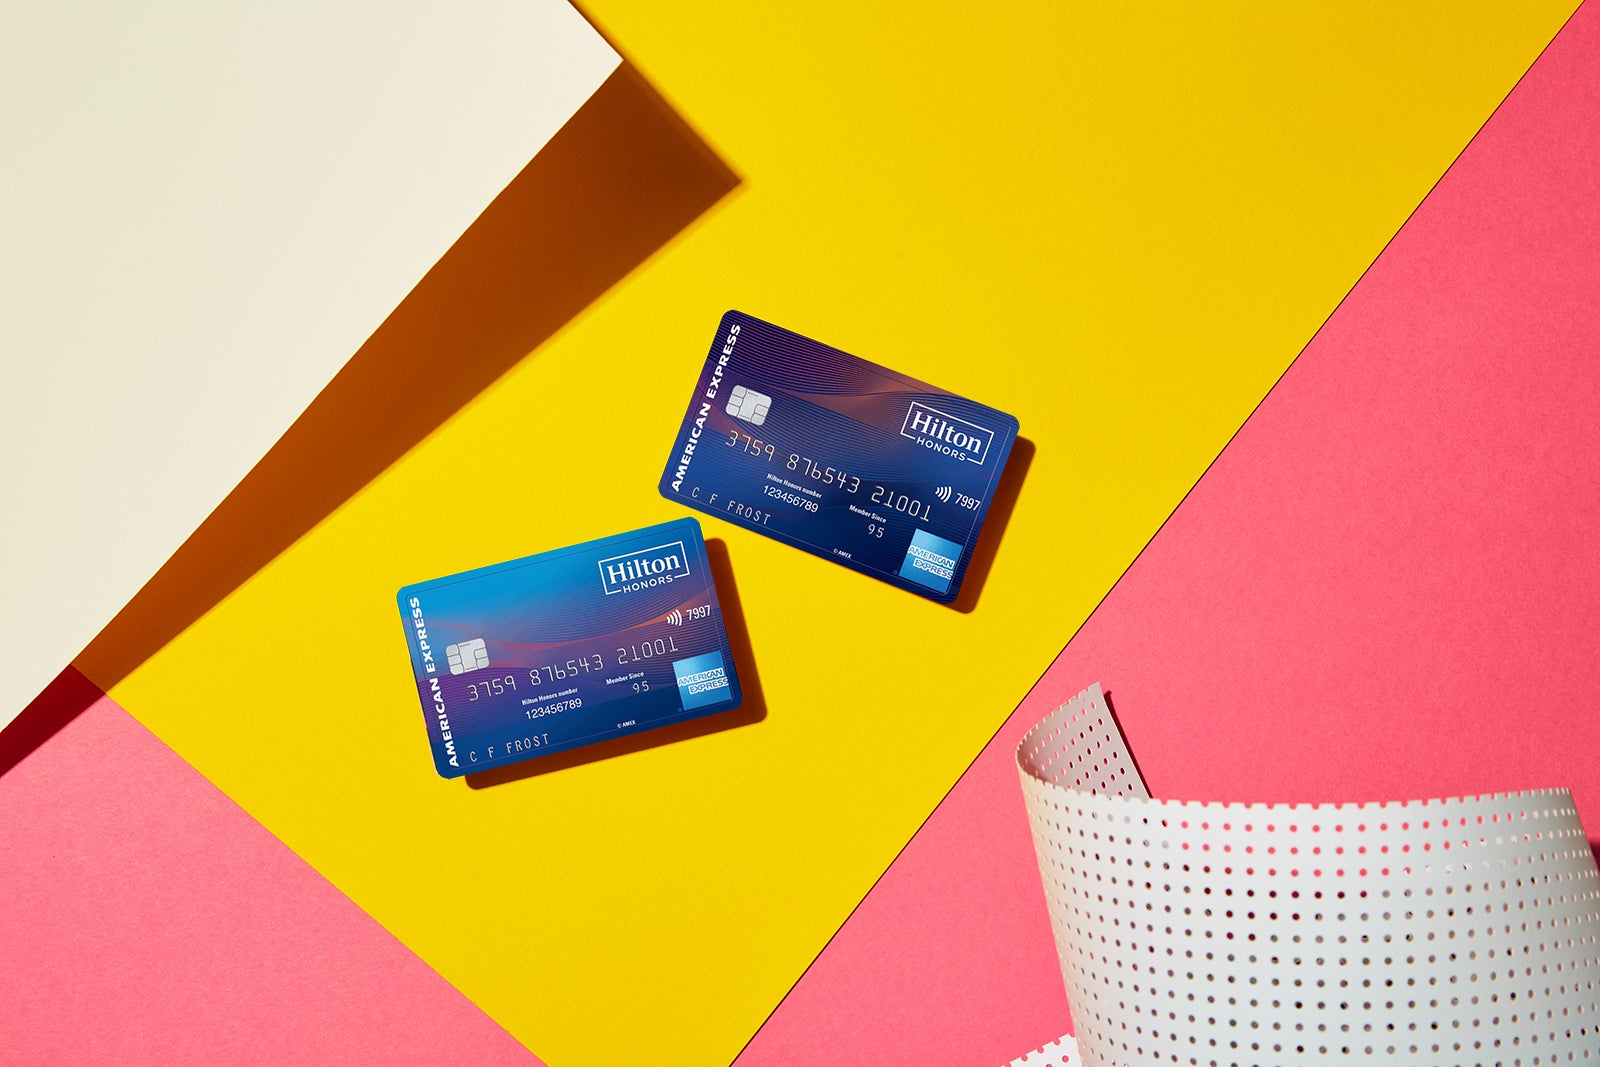 Which credit cards offer the most lucrative rewards for hotel stays?